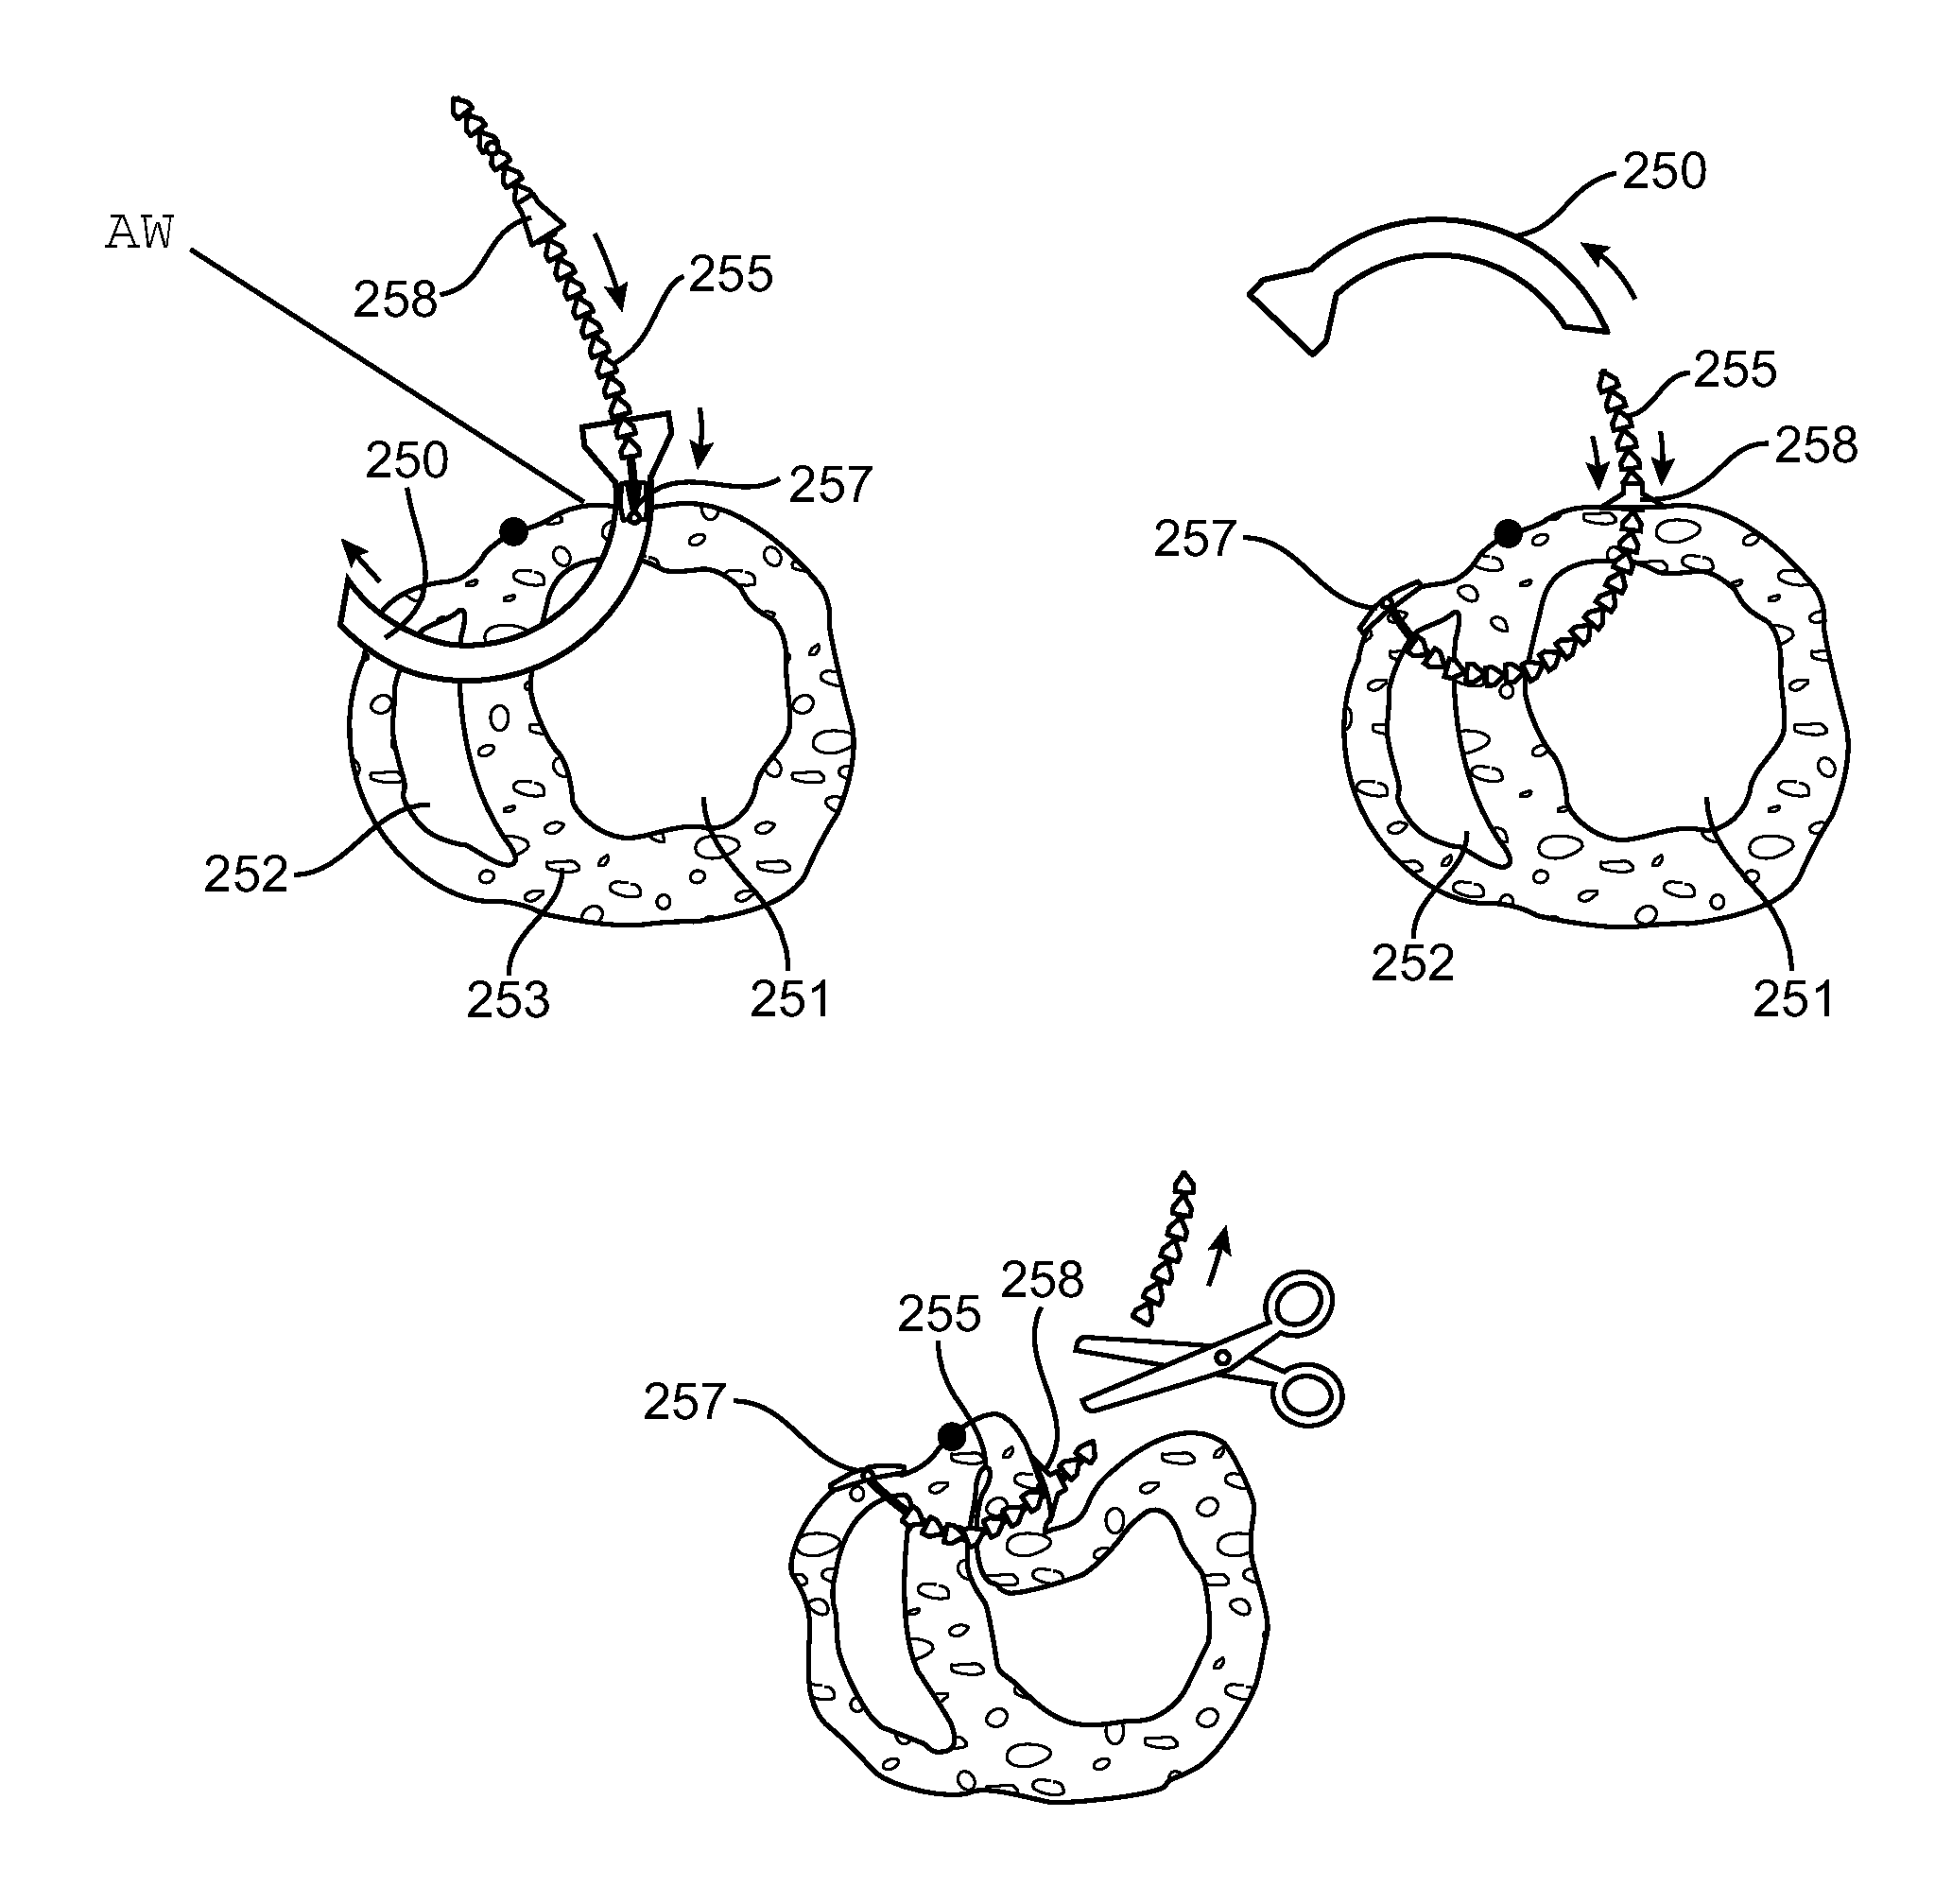 Method and device for treating dysfunctional cardiac tissue